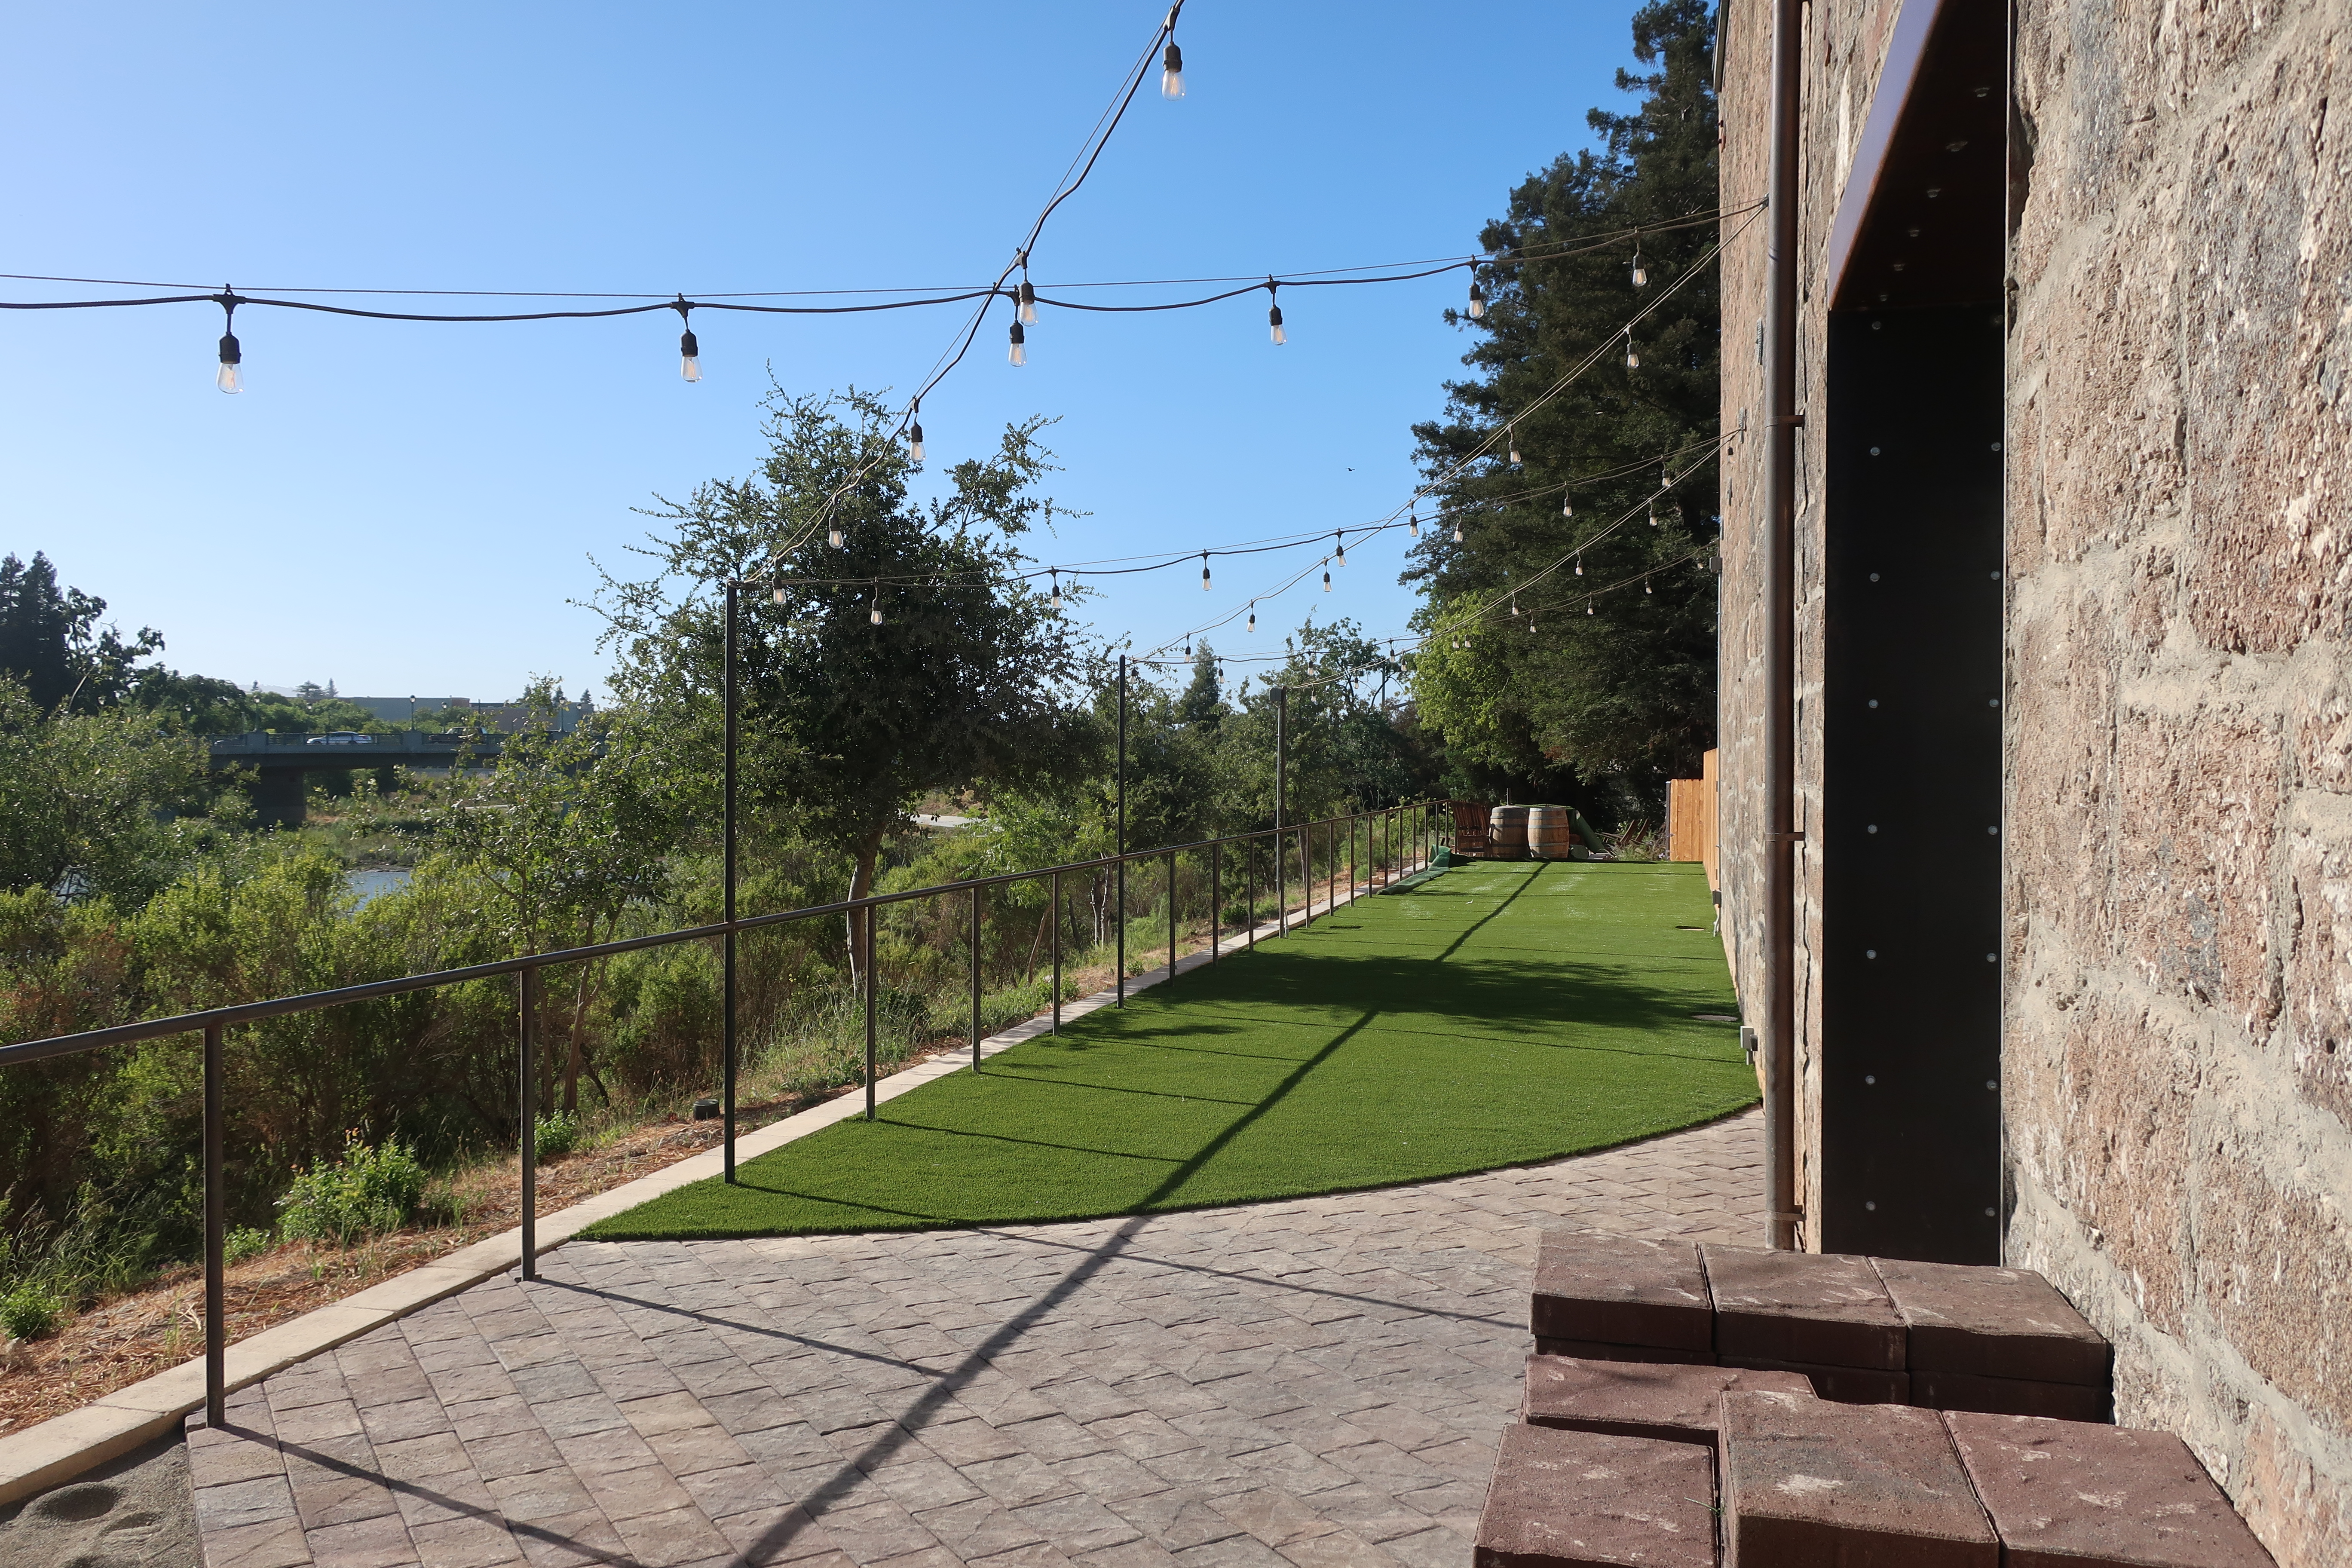 The outside artificial grass lawn at Stone Brewing - Napa.